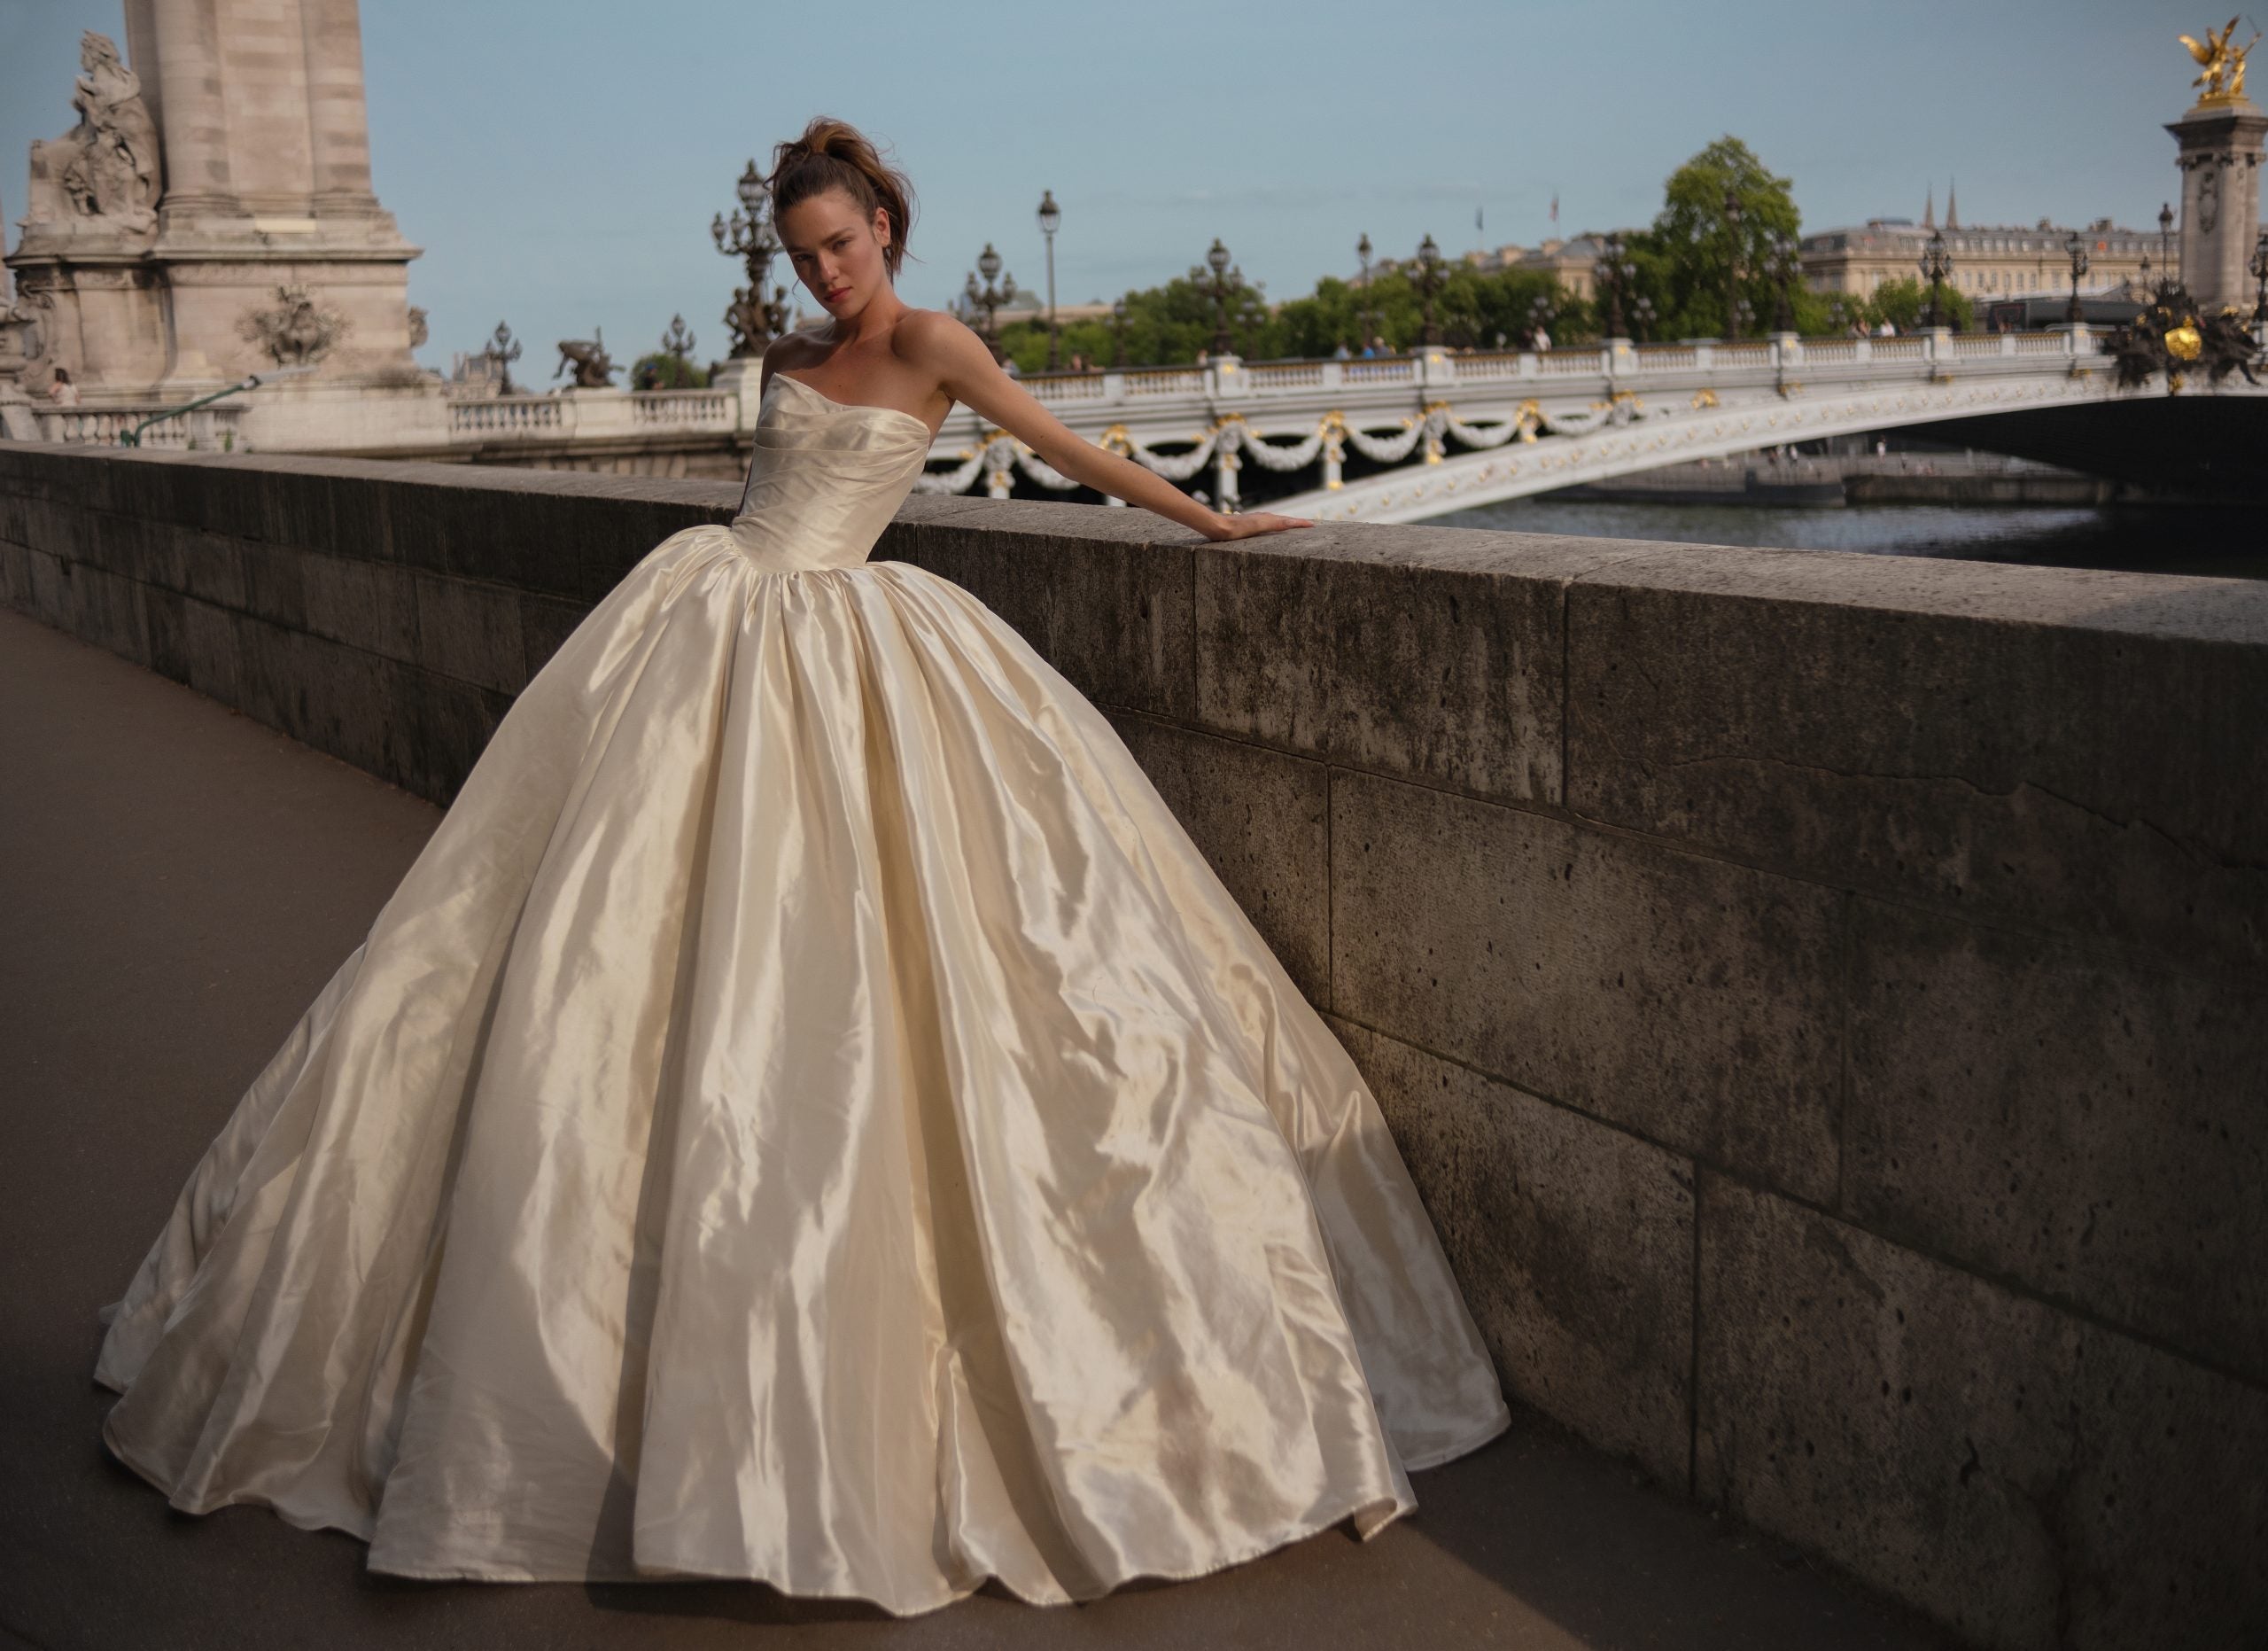 Strapless Ball Gown Wedding Dress by Nicole + Felicia